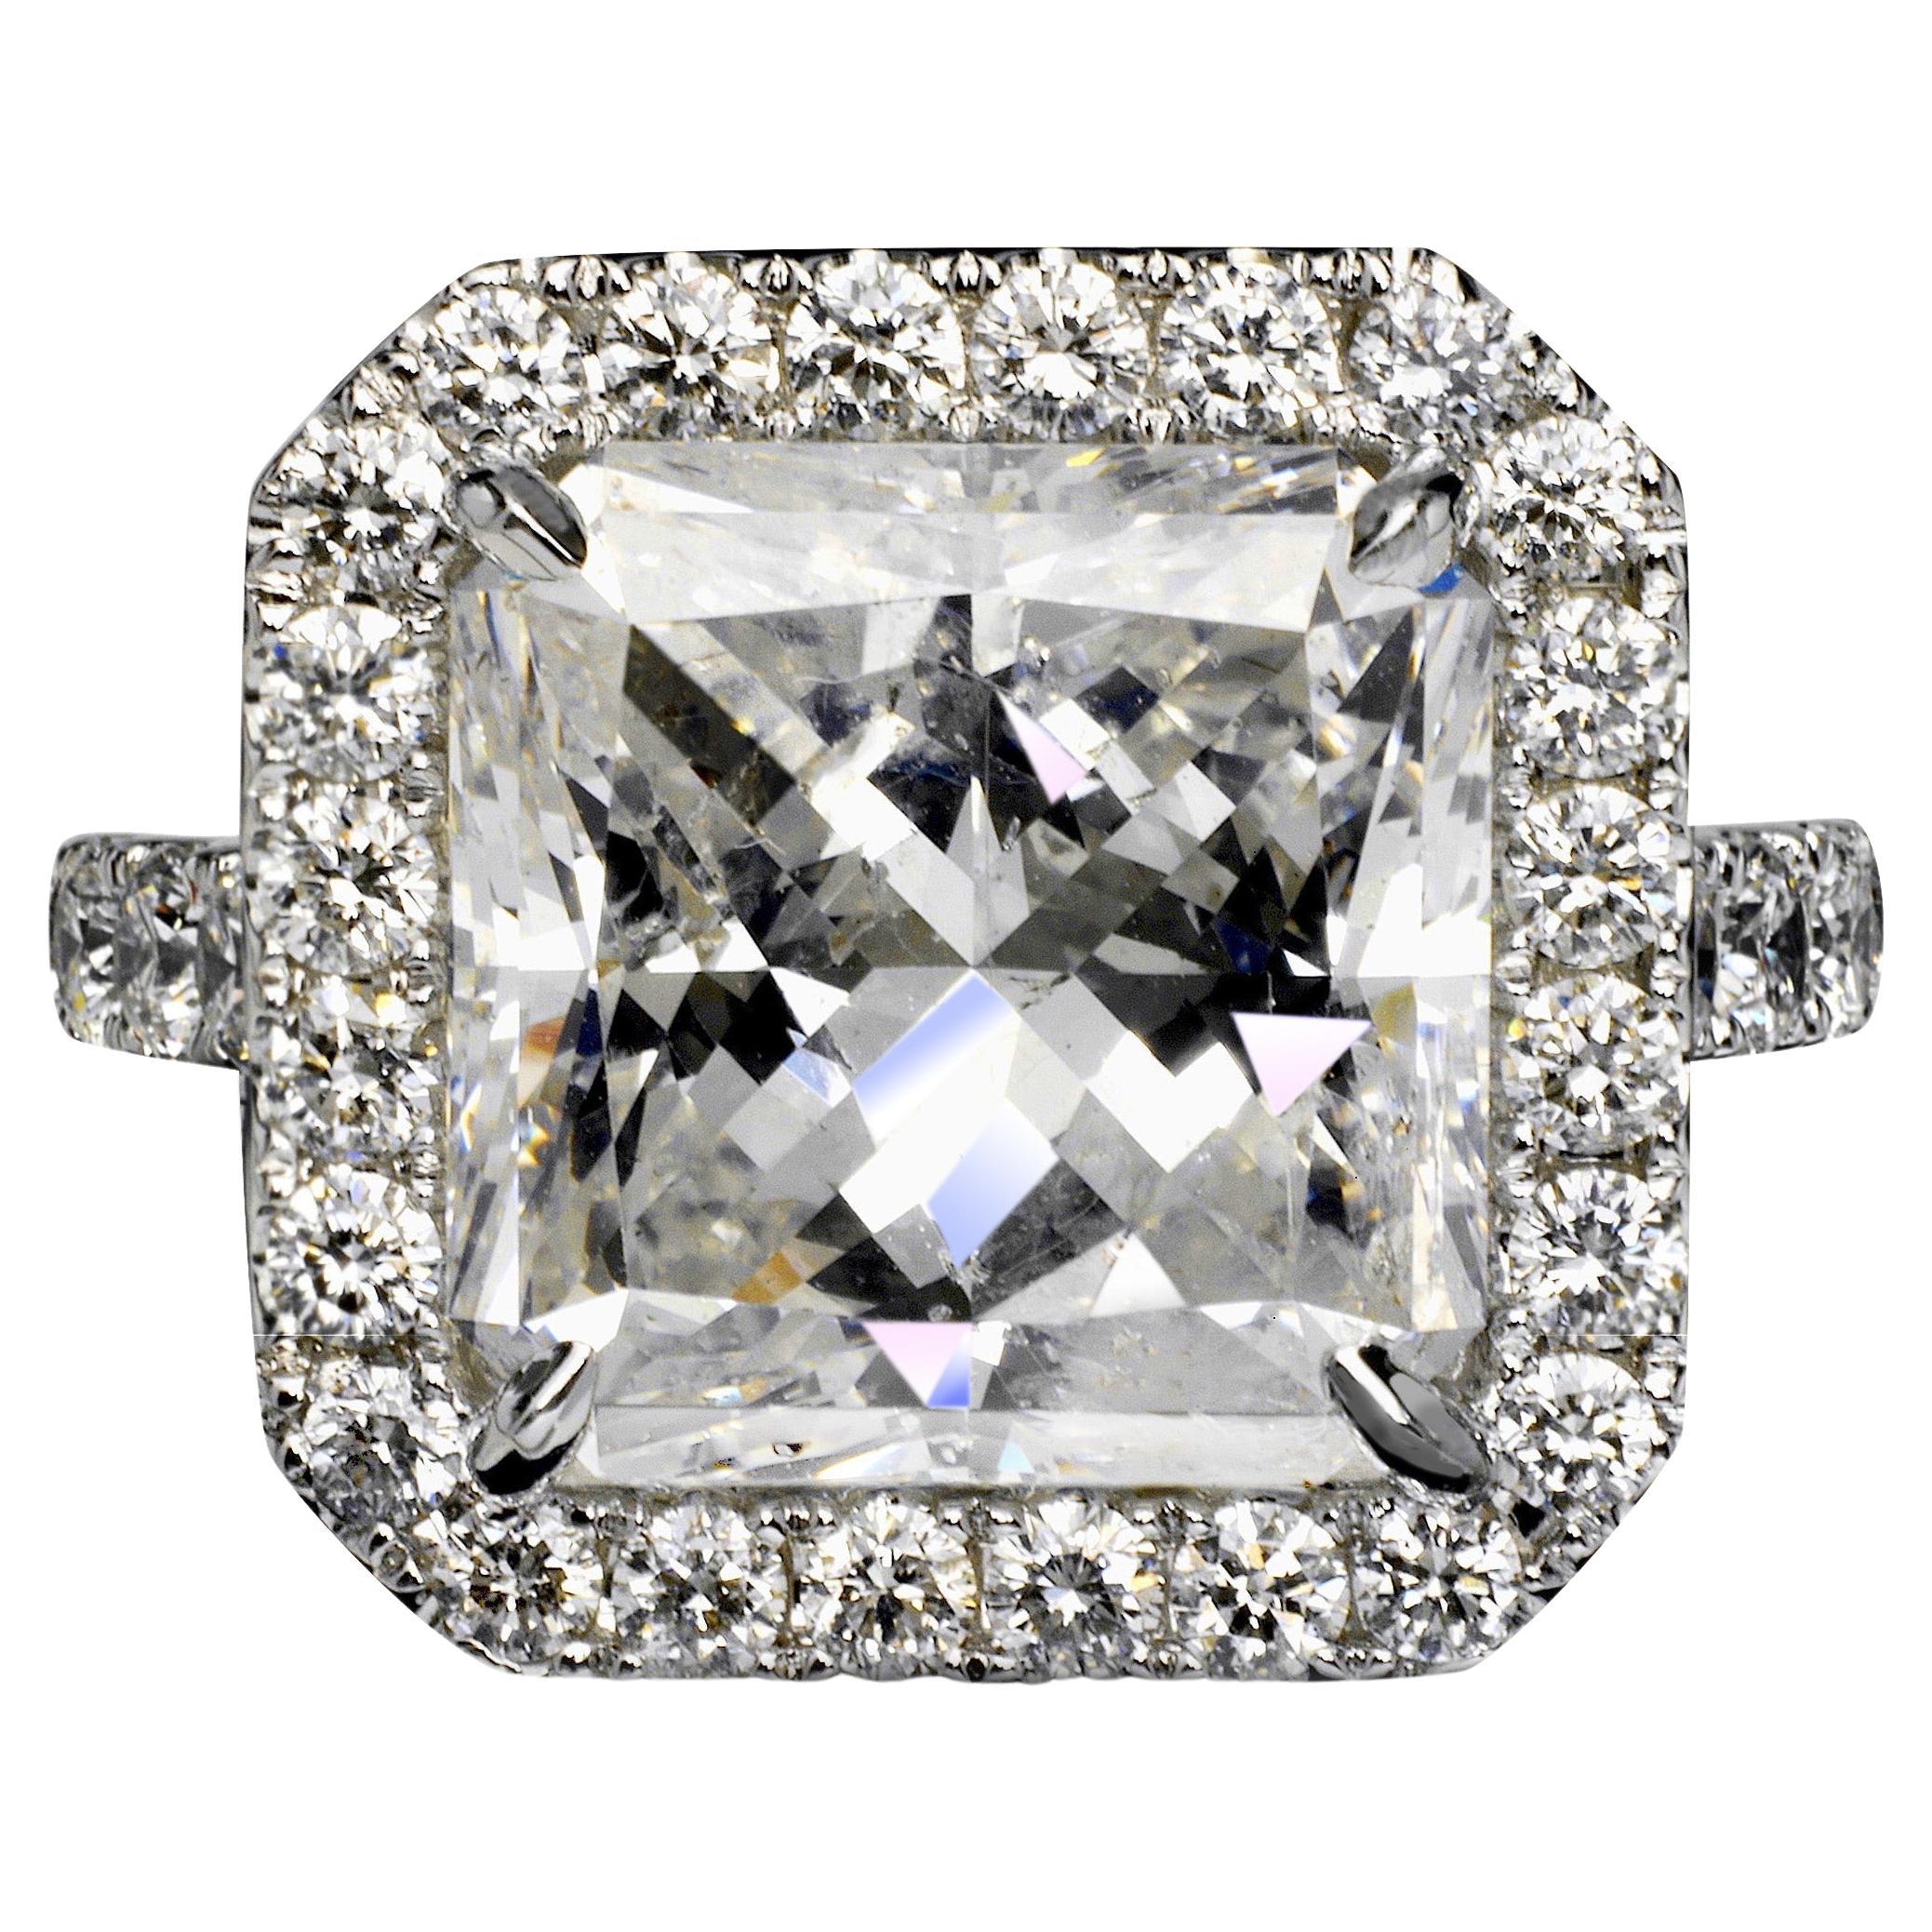 13 Carat Radiant Cut Diamond Engagement Ring Certified E SI1